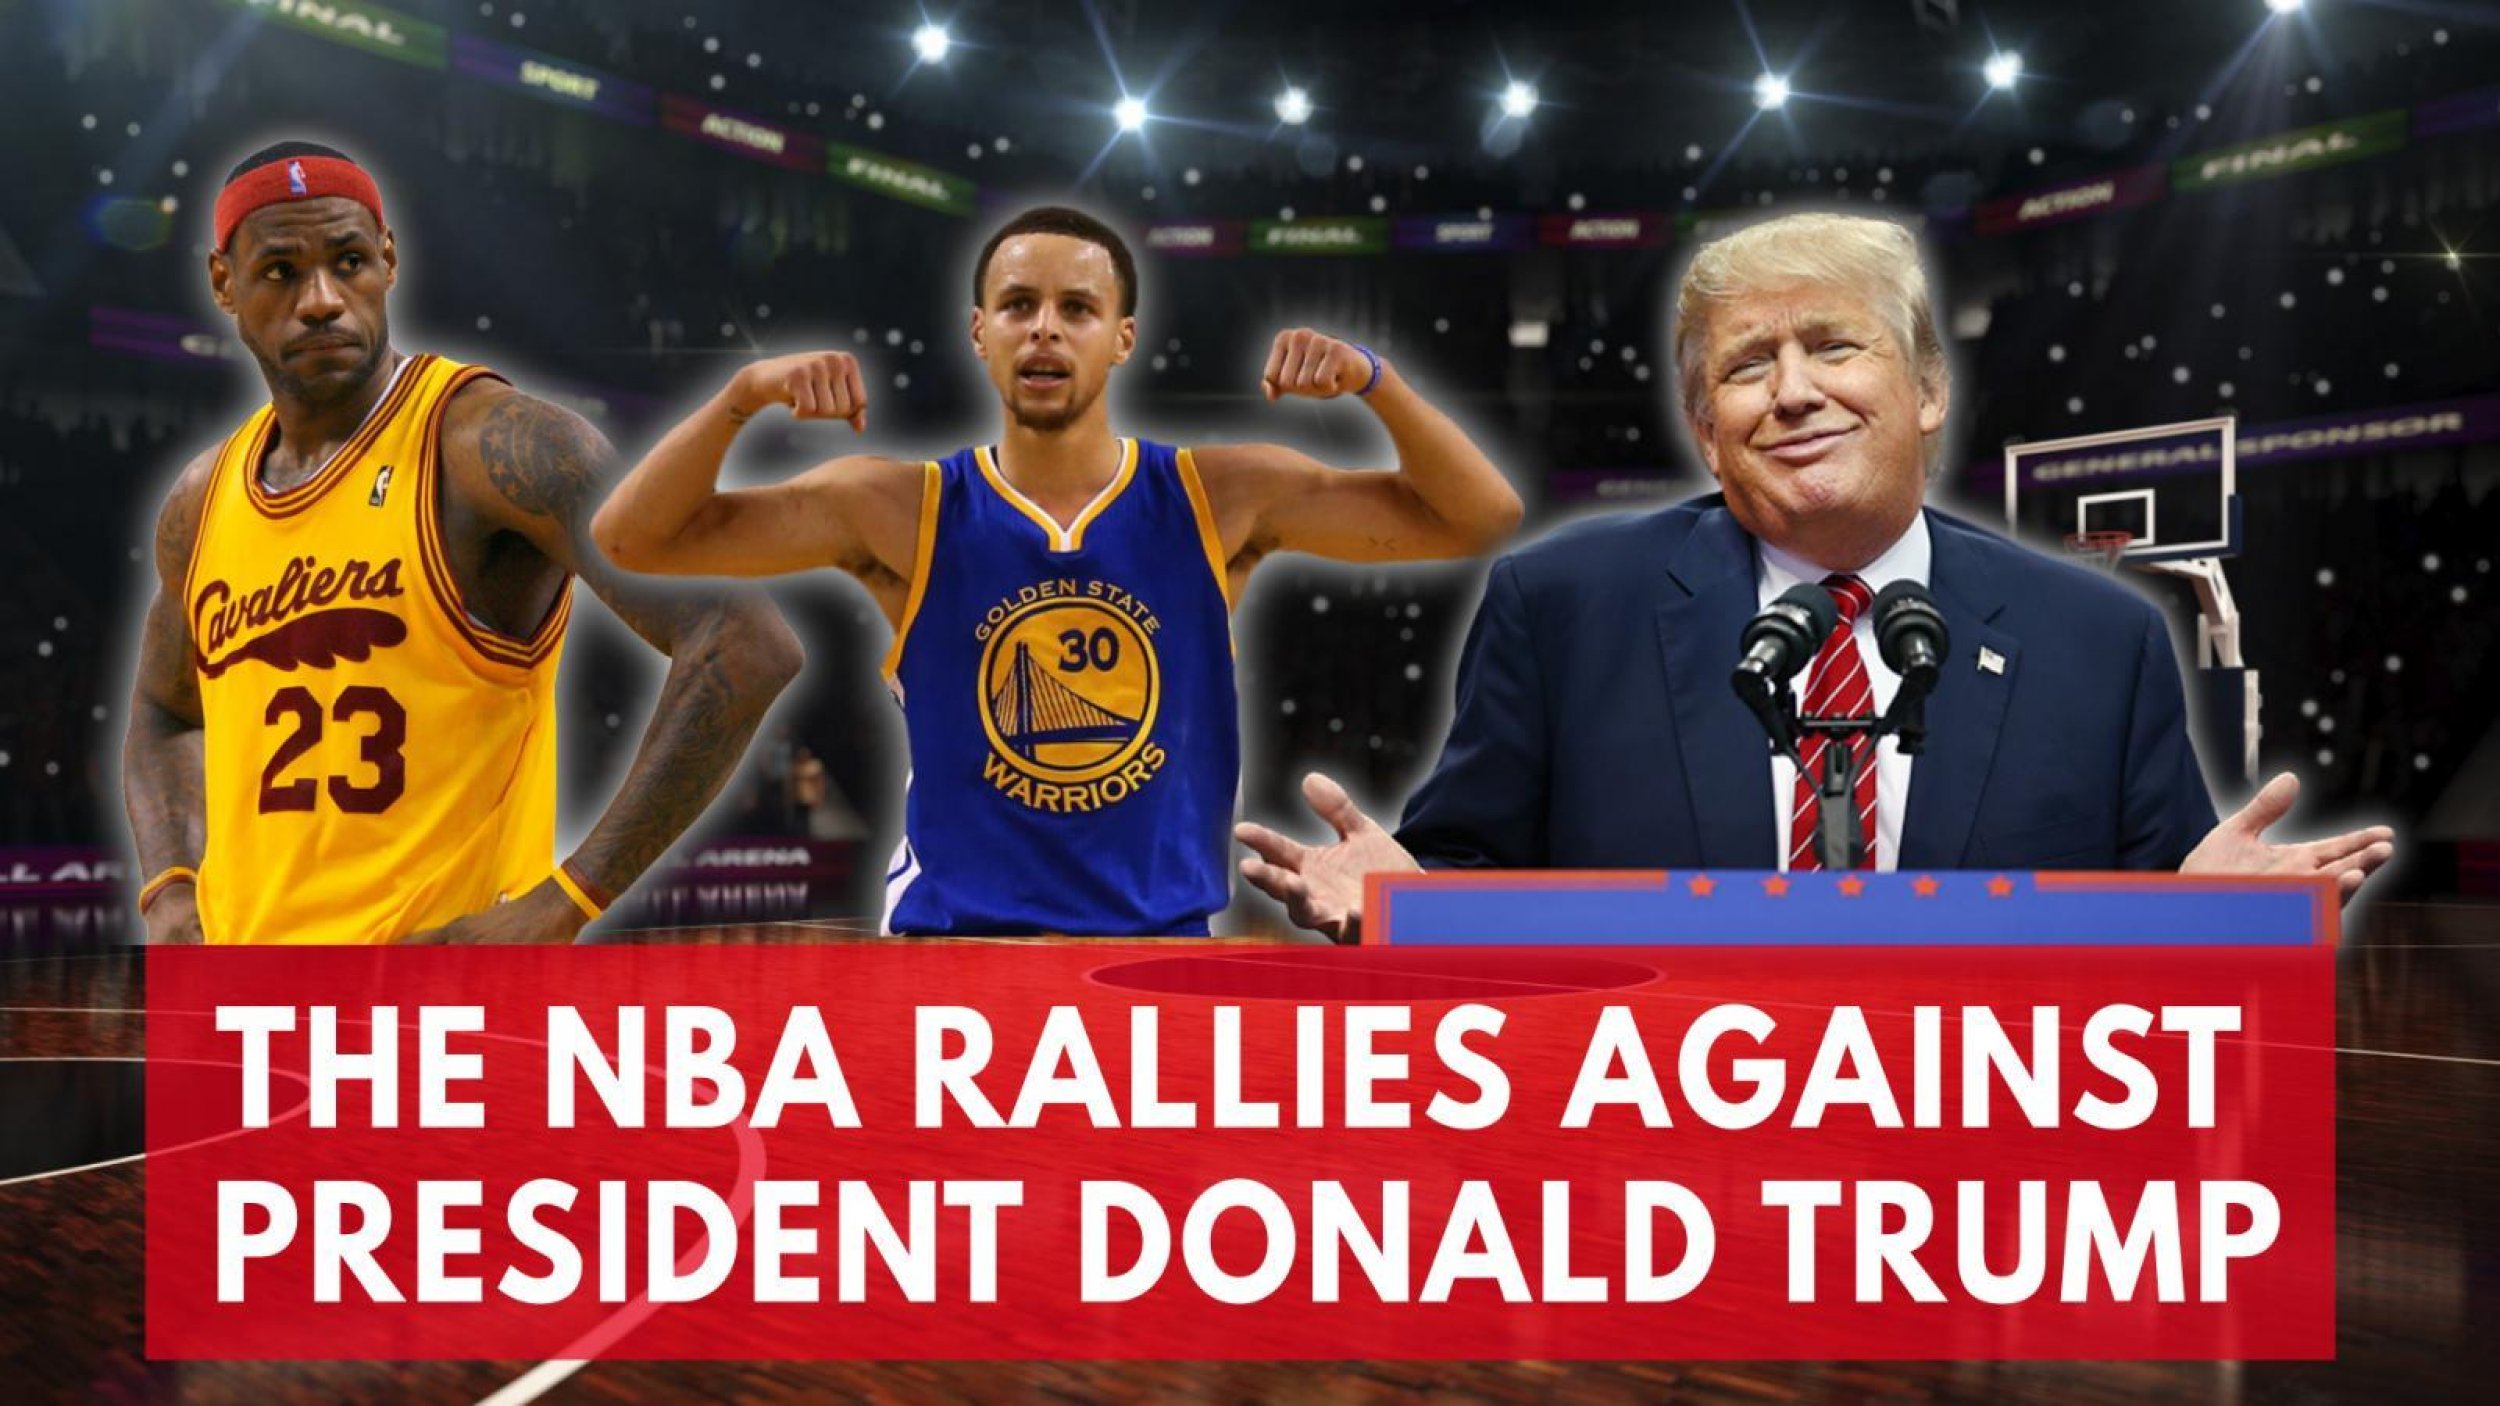 Trump Vs. The NBA Steph Curry, LeBron James And Other Big Stars Take On The President